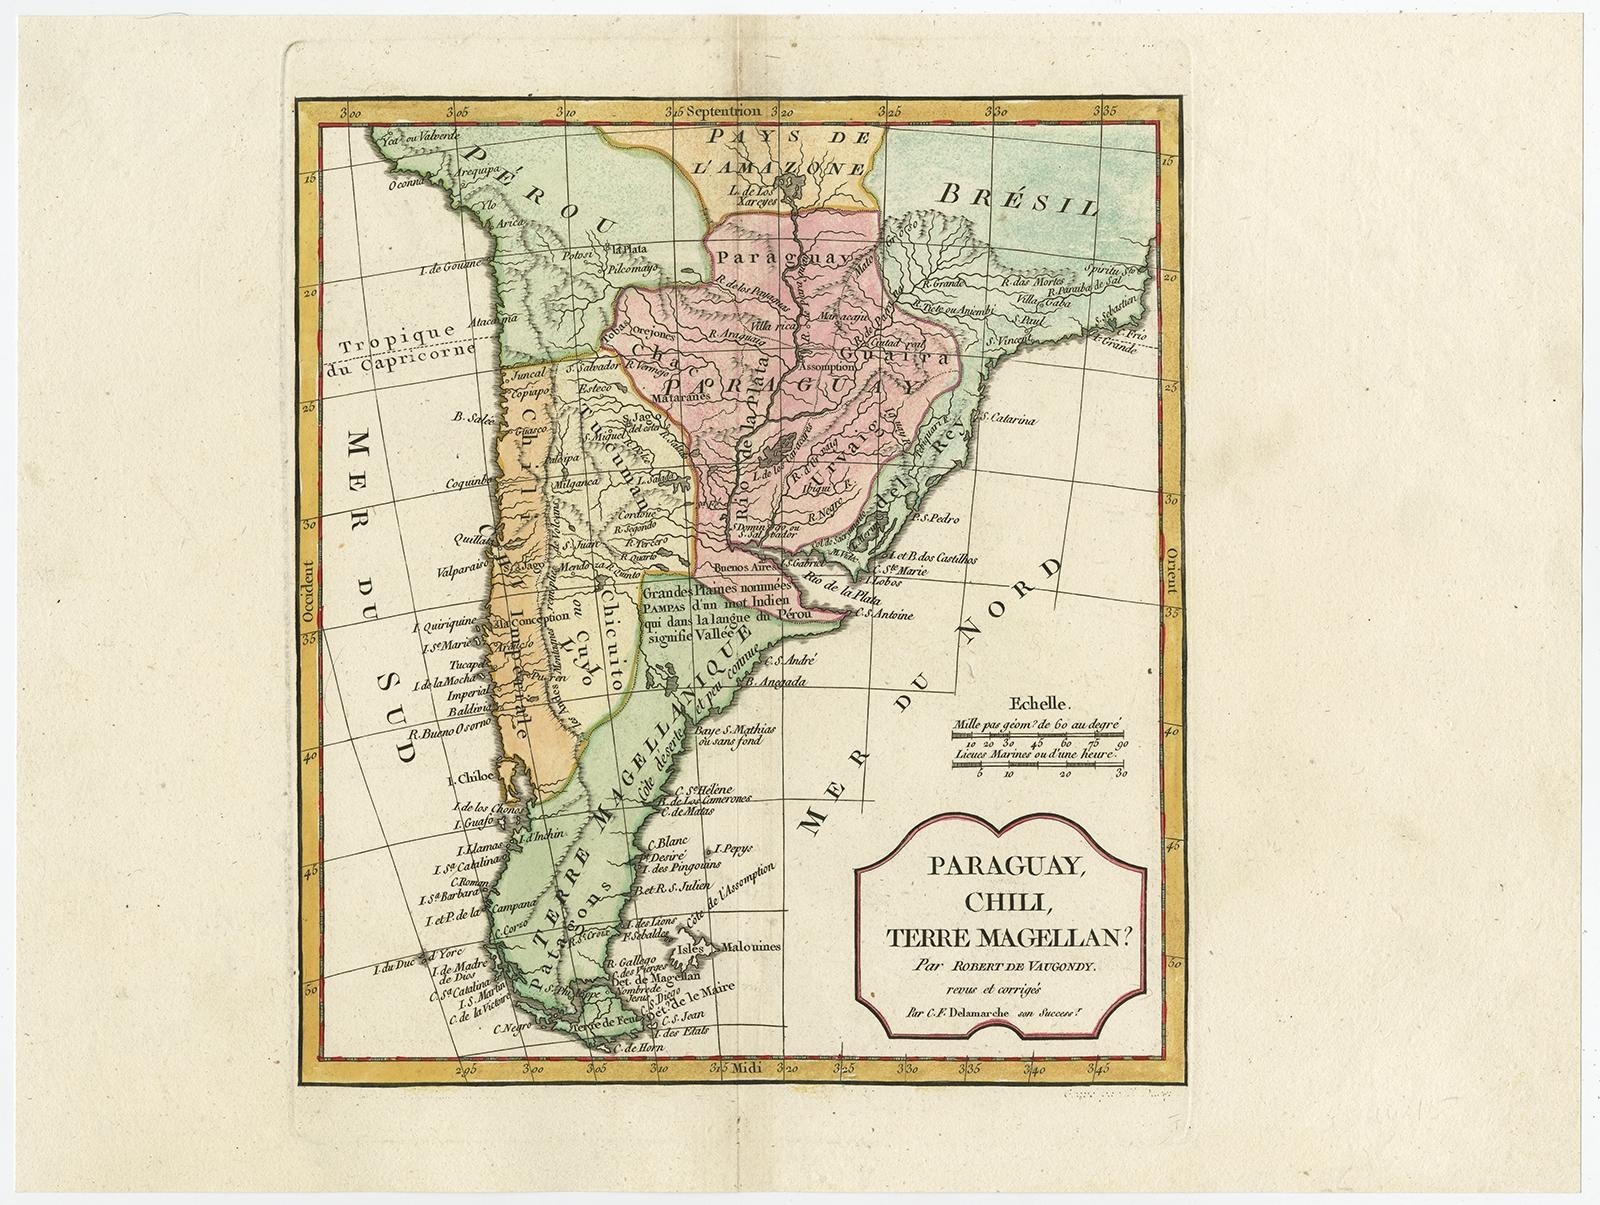 Description: Antique map titled 'Paraguay, Chili, Terre Magellan?' 

Decorative map of the southern part of South America by Robert de Vaugondy, revised and published by Delamarche. Source unknown, to be determined.

Artists and Engravers: